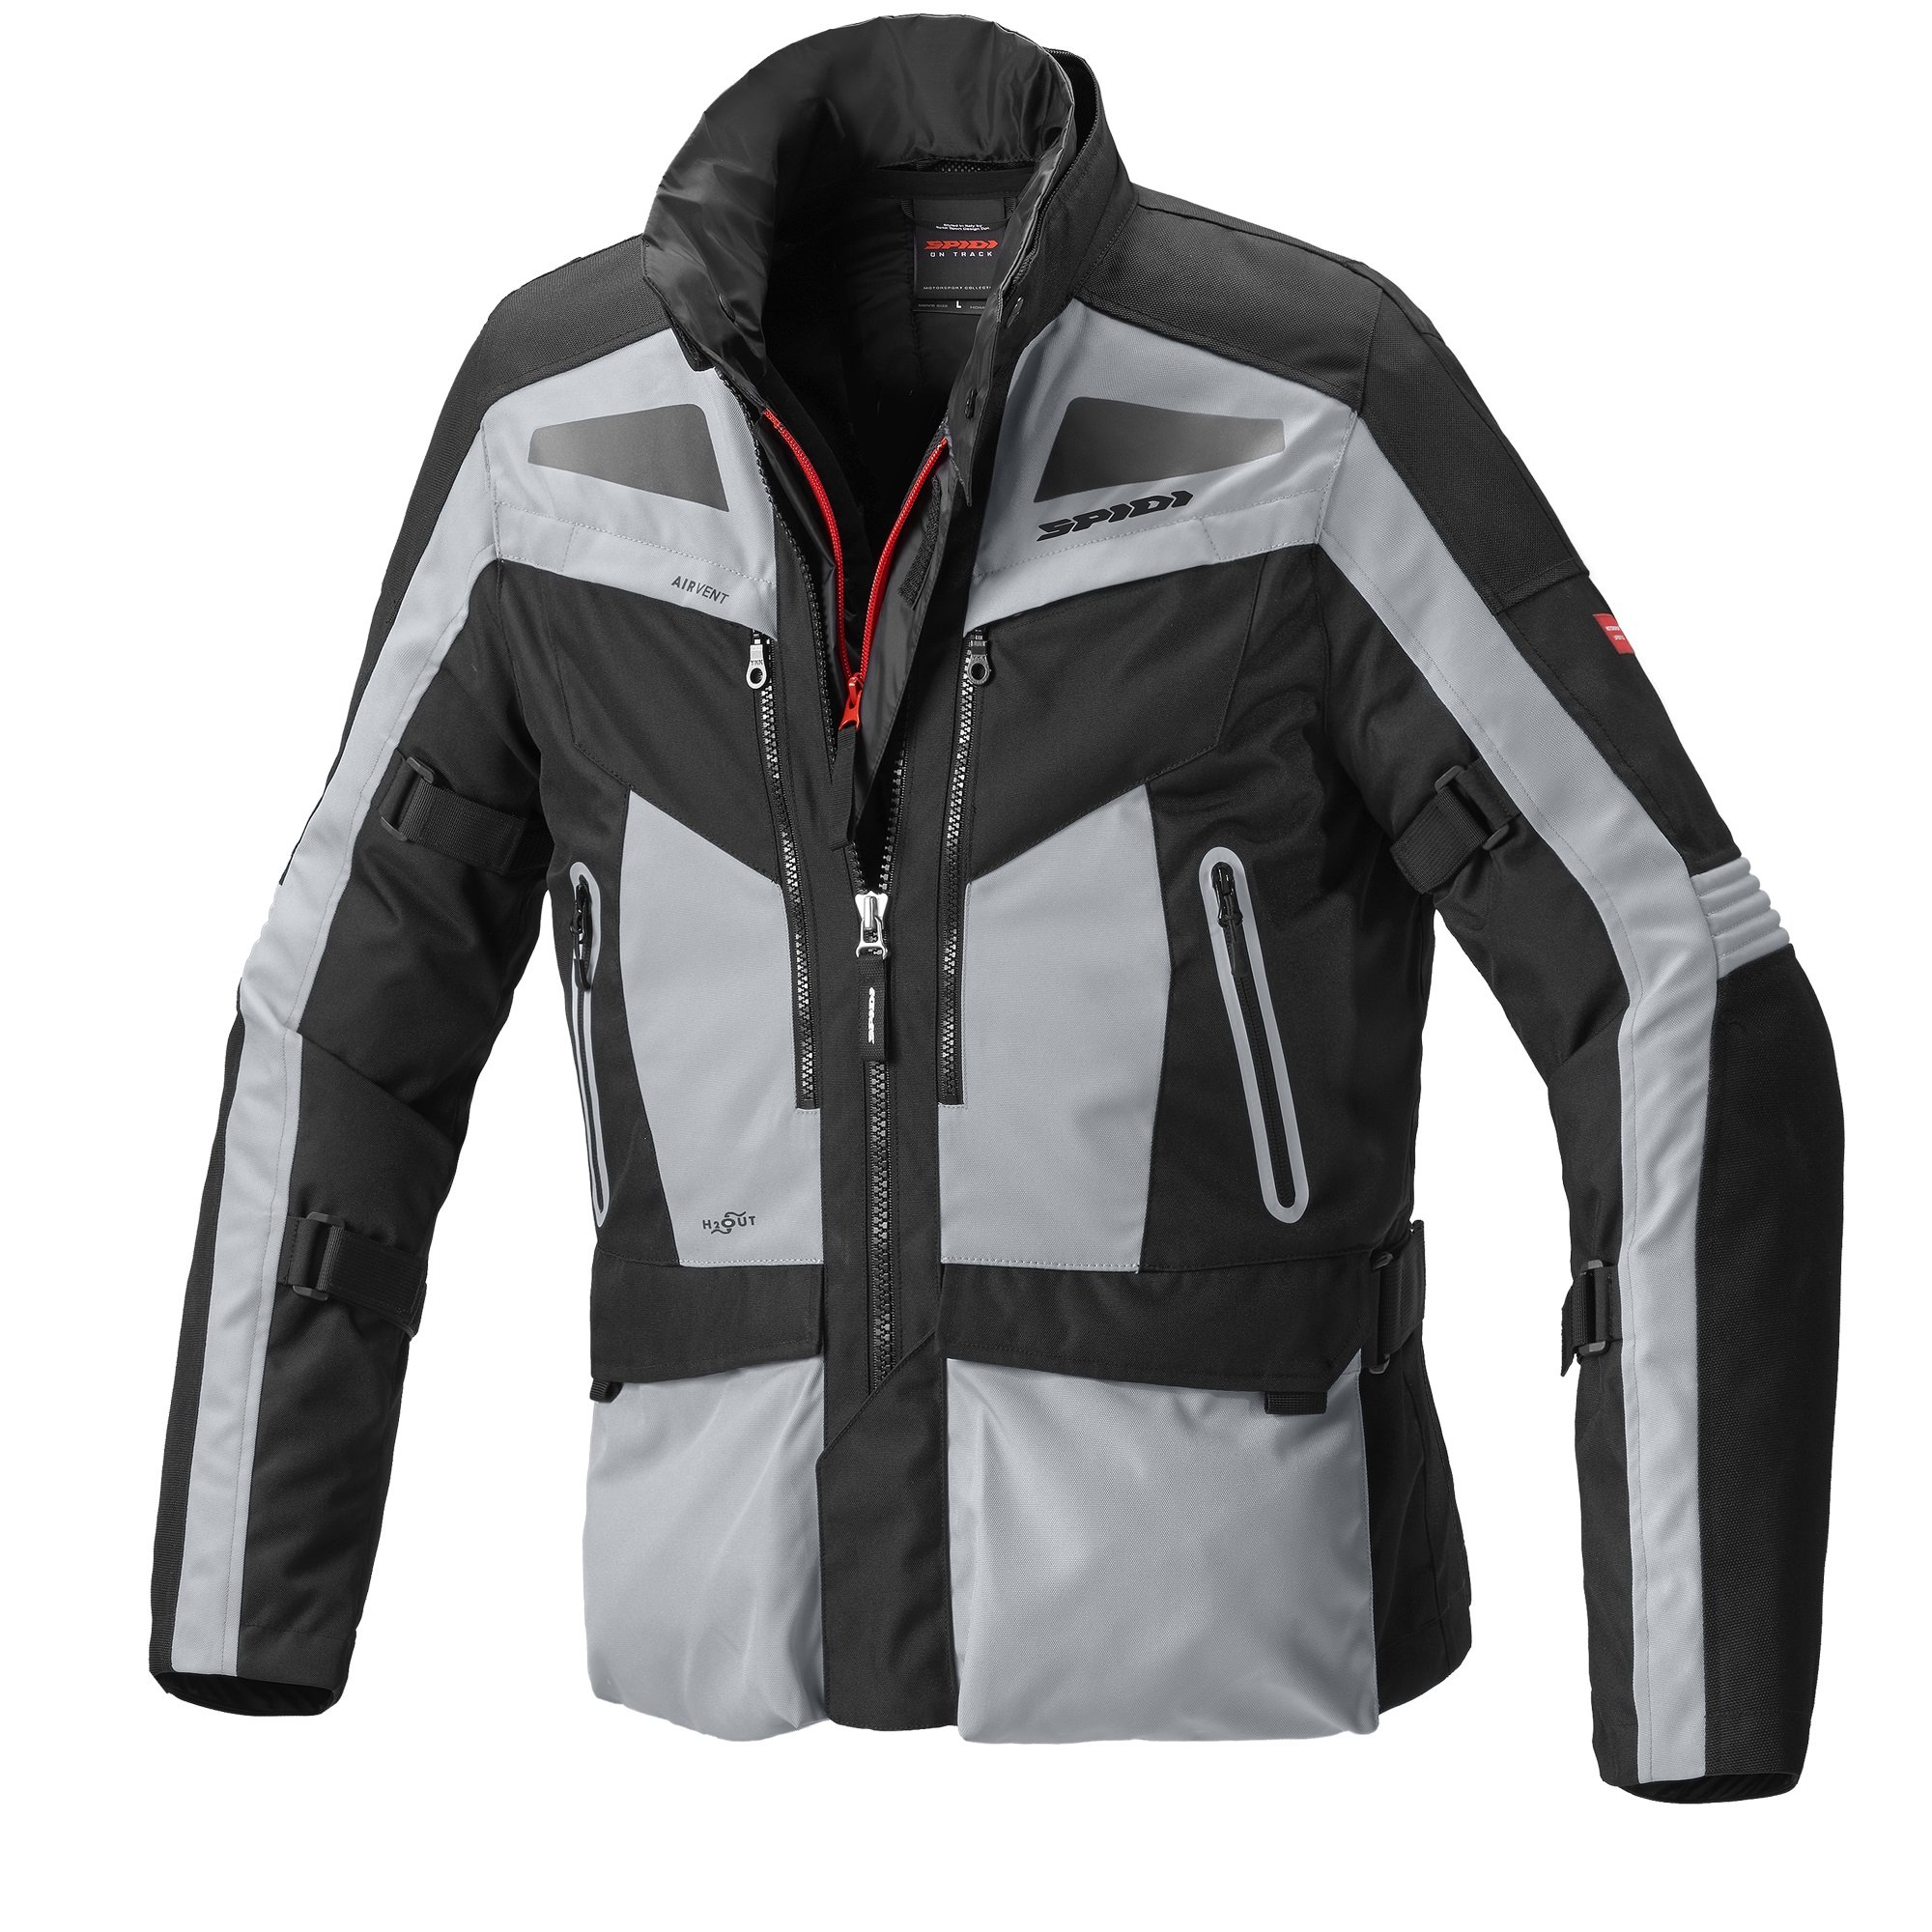 Image of Spidi VoyagerEvo H2Out Jacket Gray Black Size 2XL ID 8030161340464